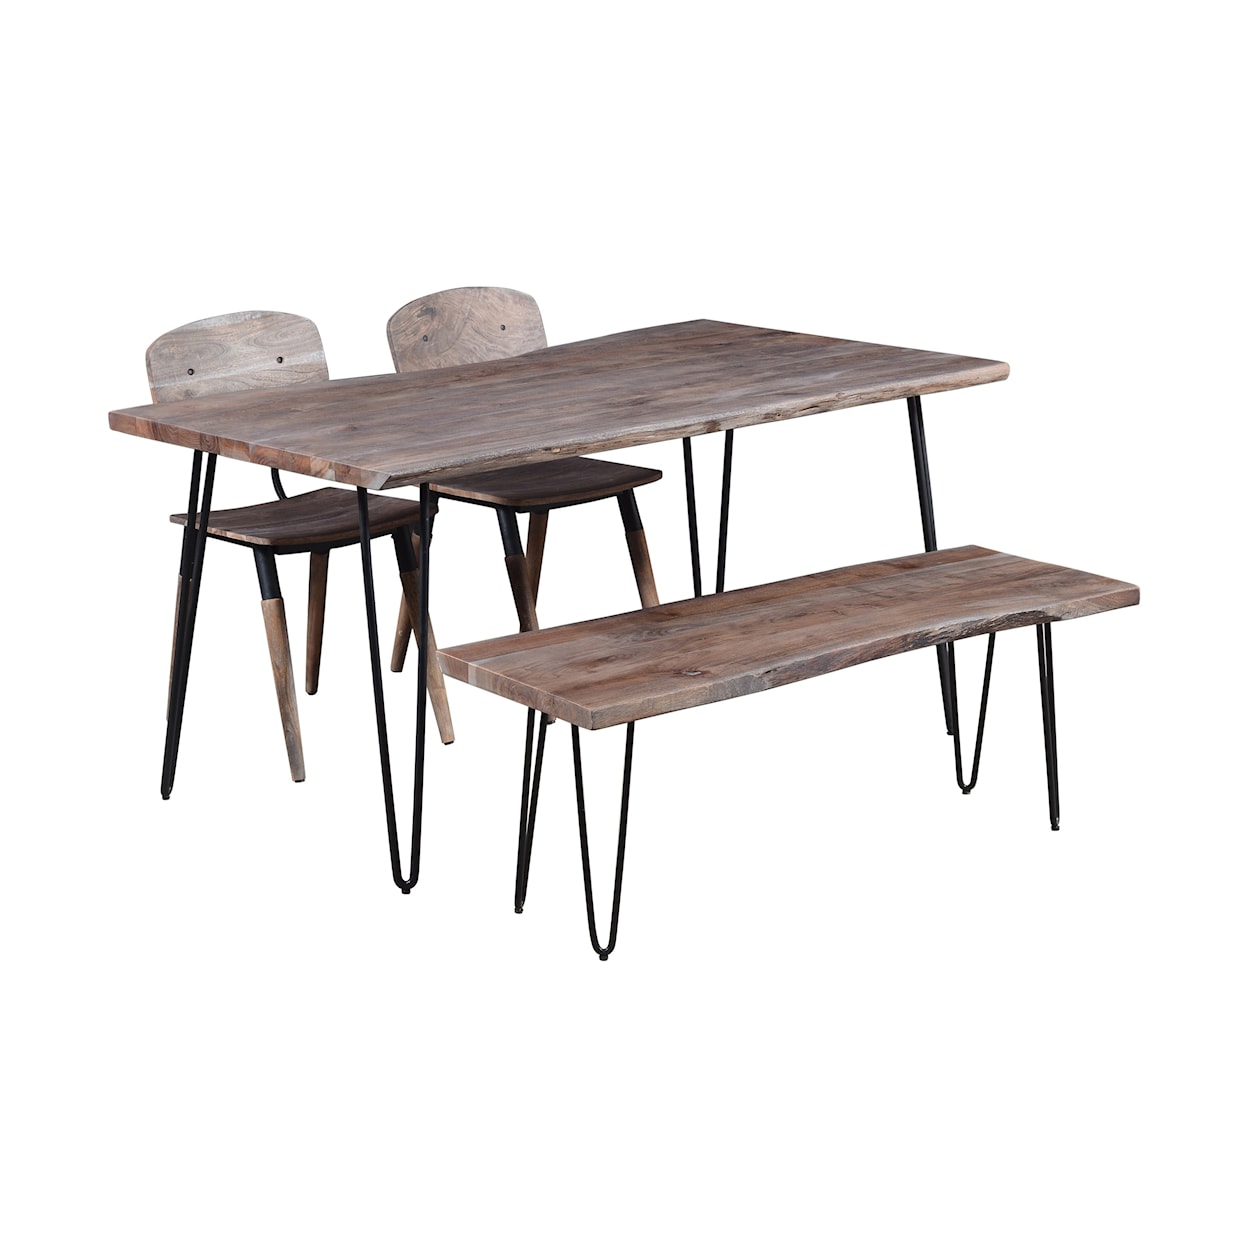 Jofran Nature's Edge 60" Dining Table with 2 Chairs and Bench